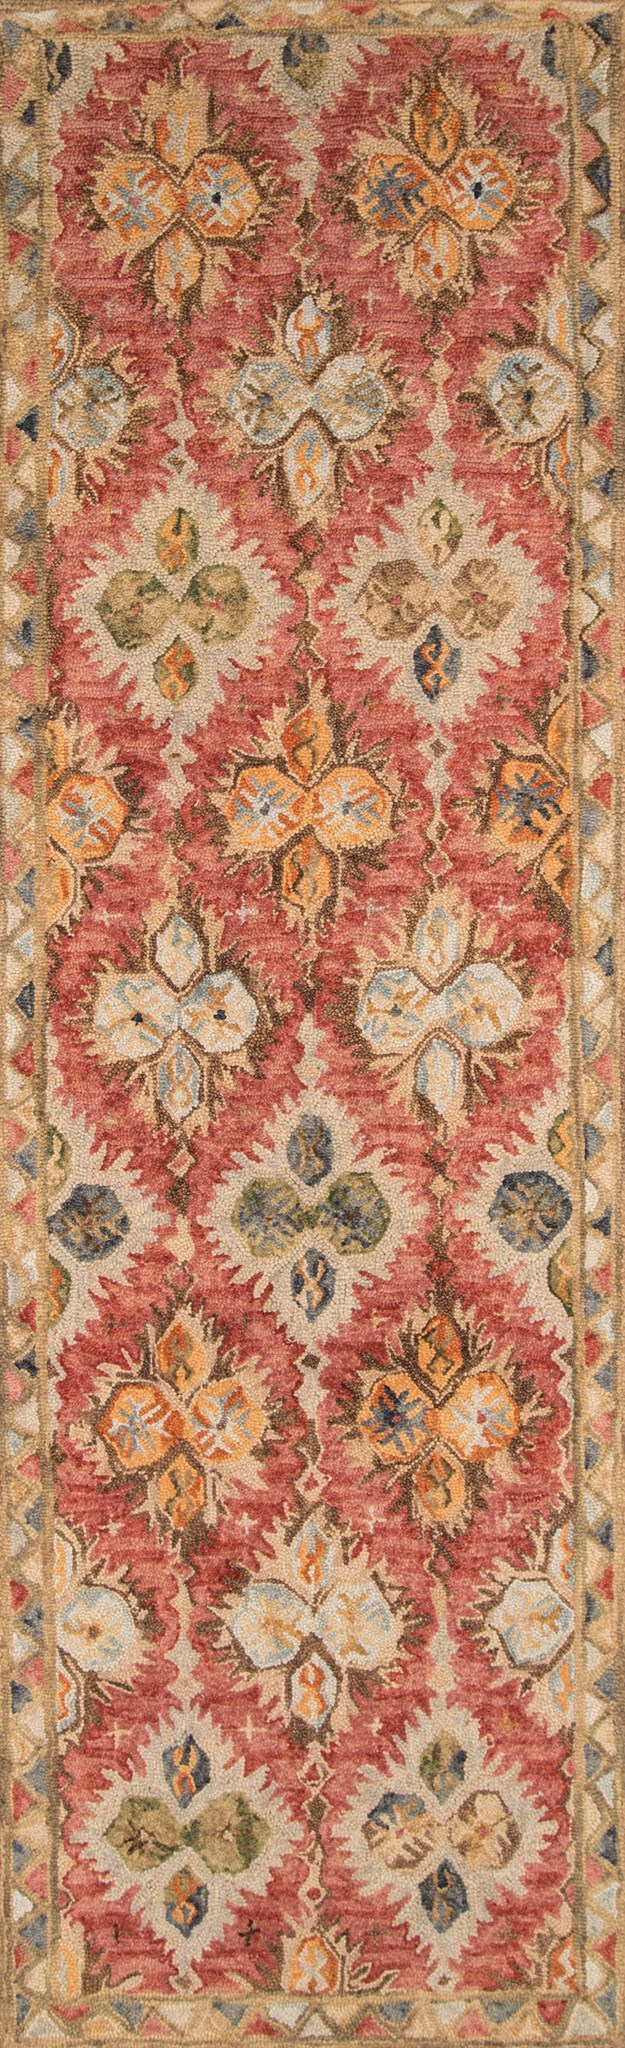 Transitional & Casual Rugs TANGIER TAN-17 Red - Burgundy & Multi Hand Hooked Rug